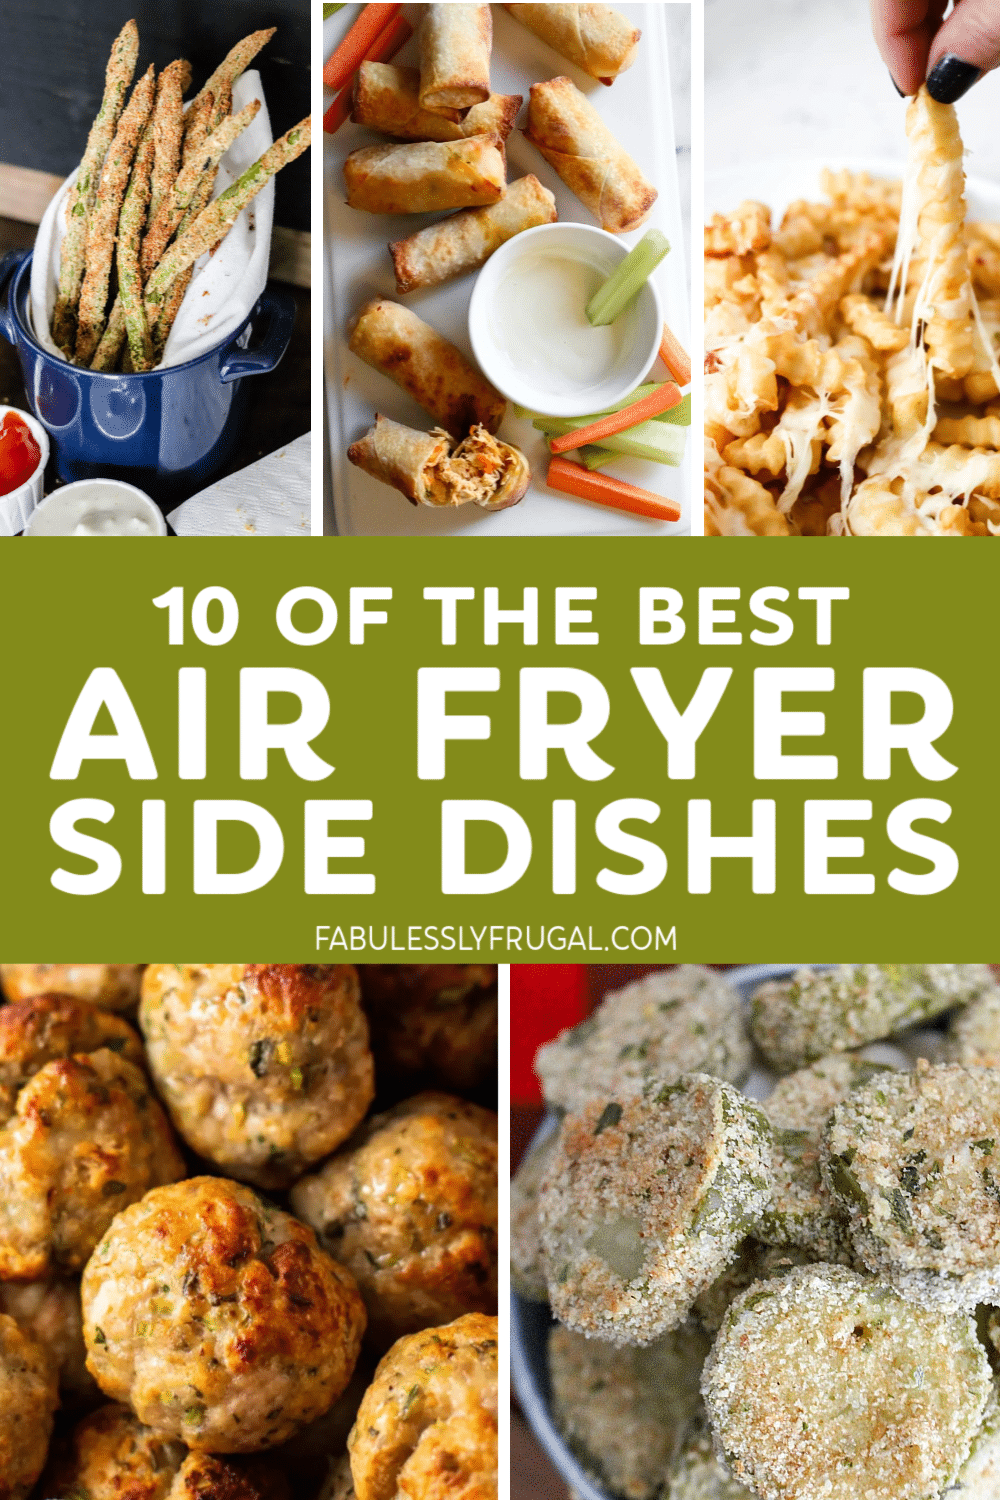 Air fryer side dishes